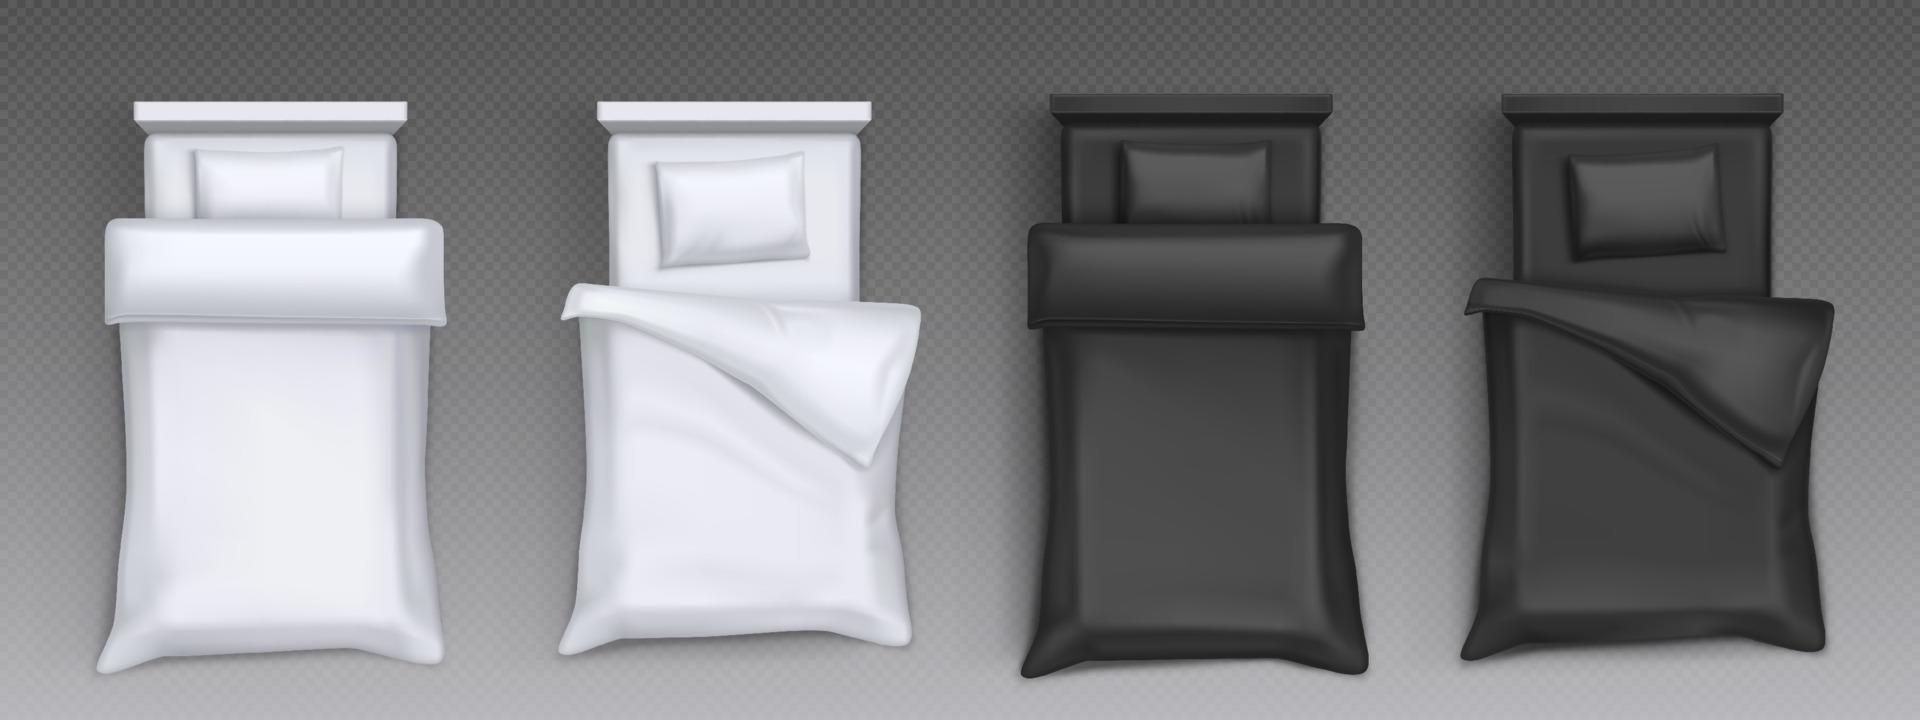 Unmade beds with white and black bedclothes vector